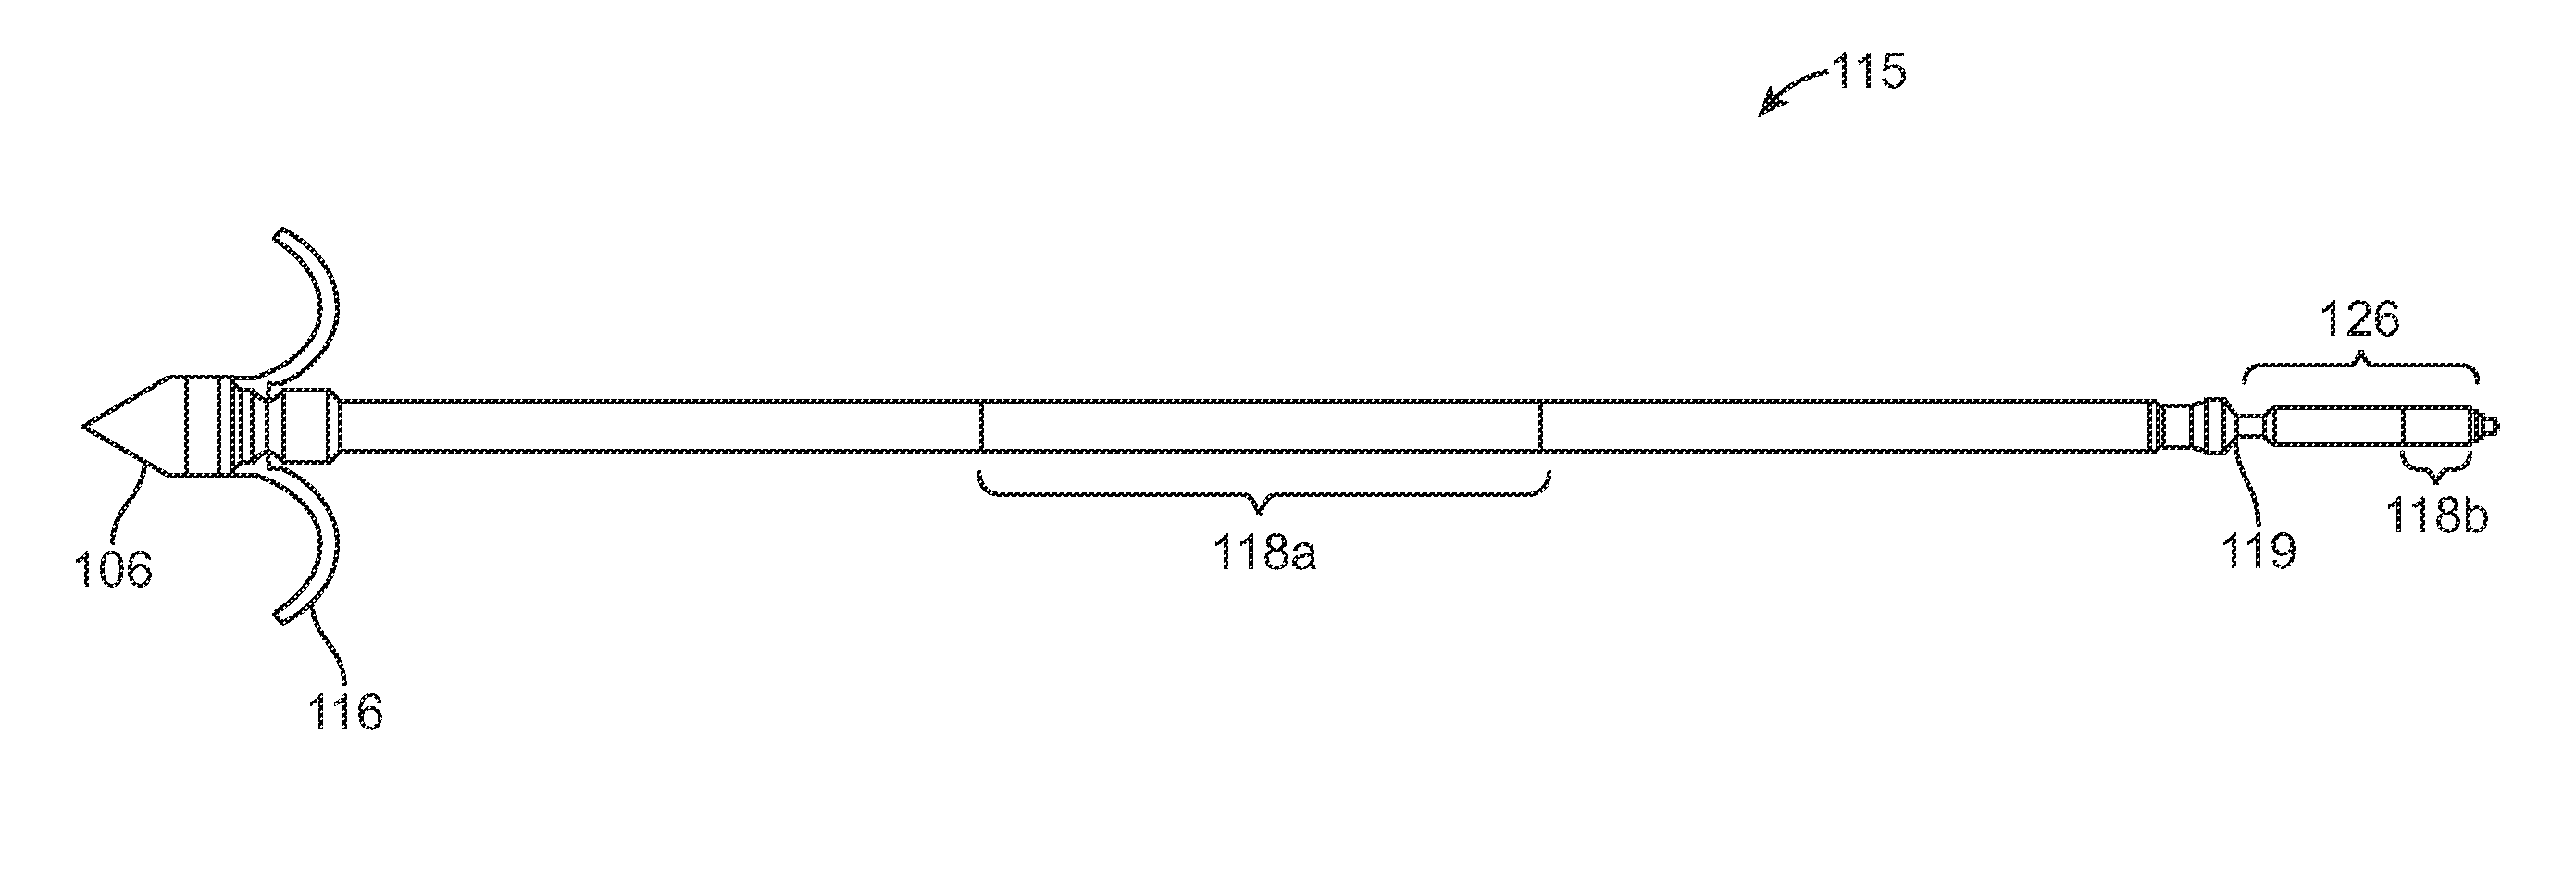 Temporary electrode connection for wireless pacing systems